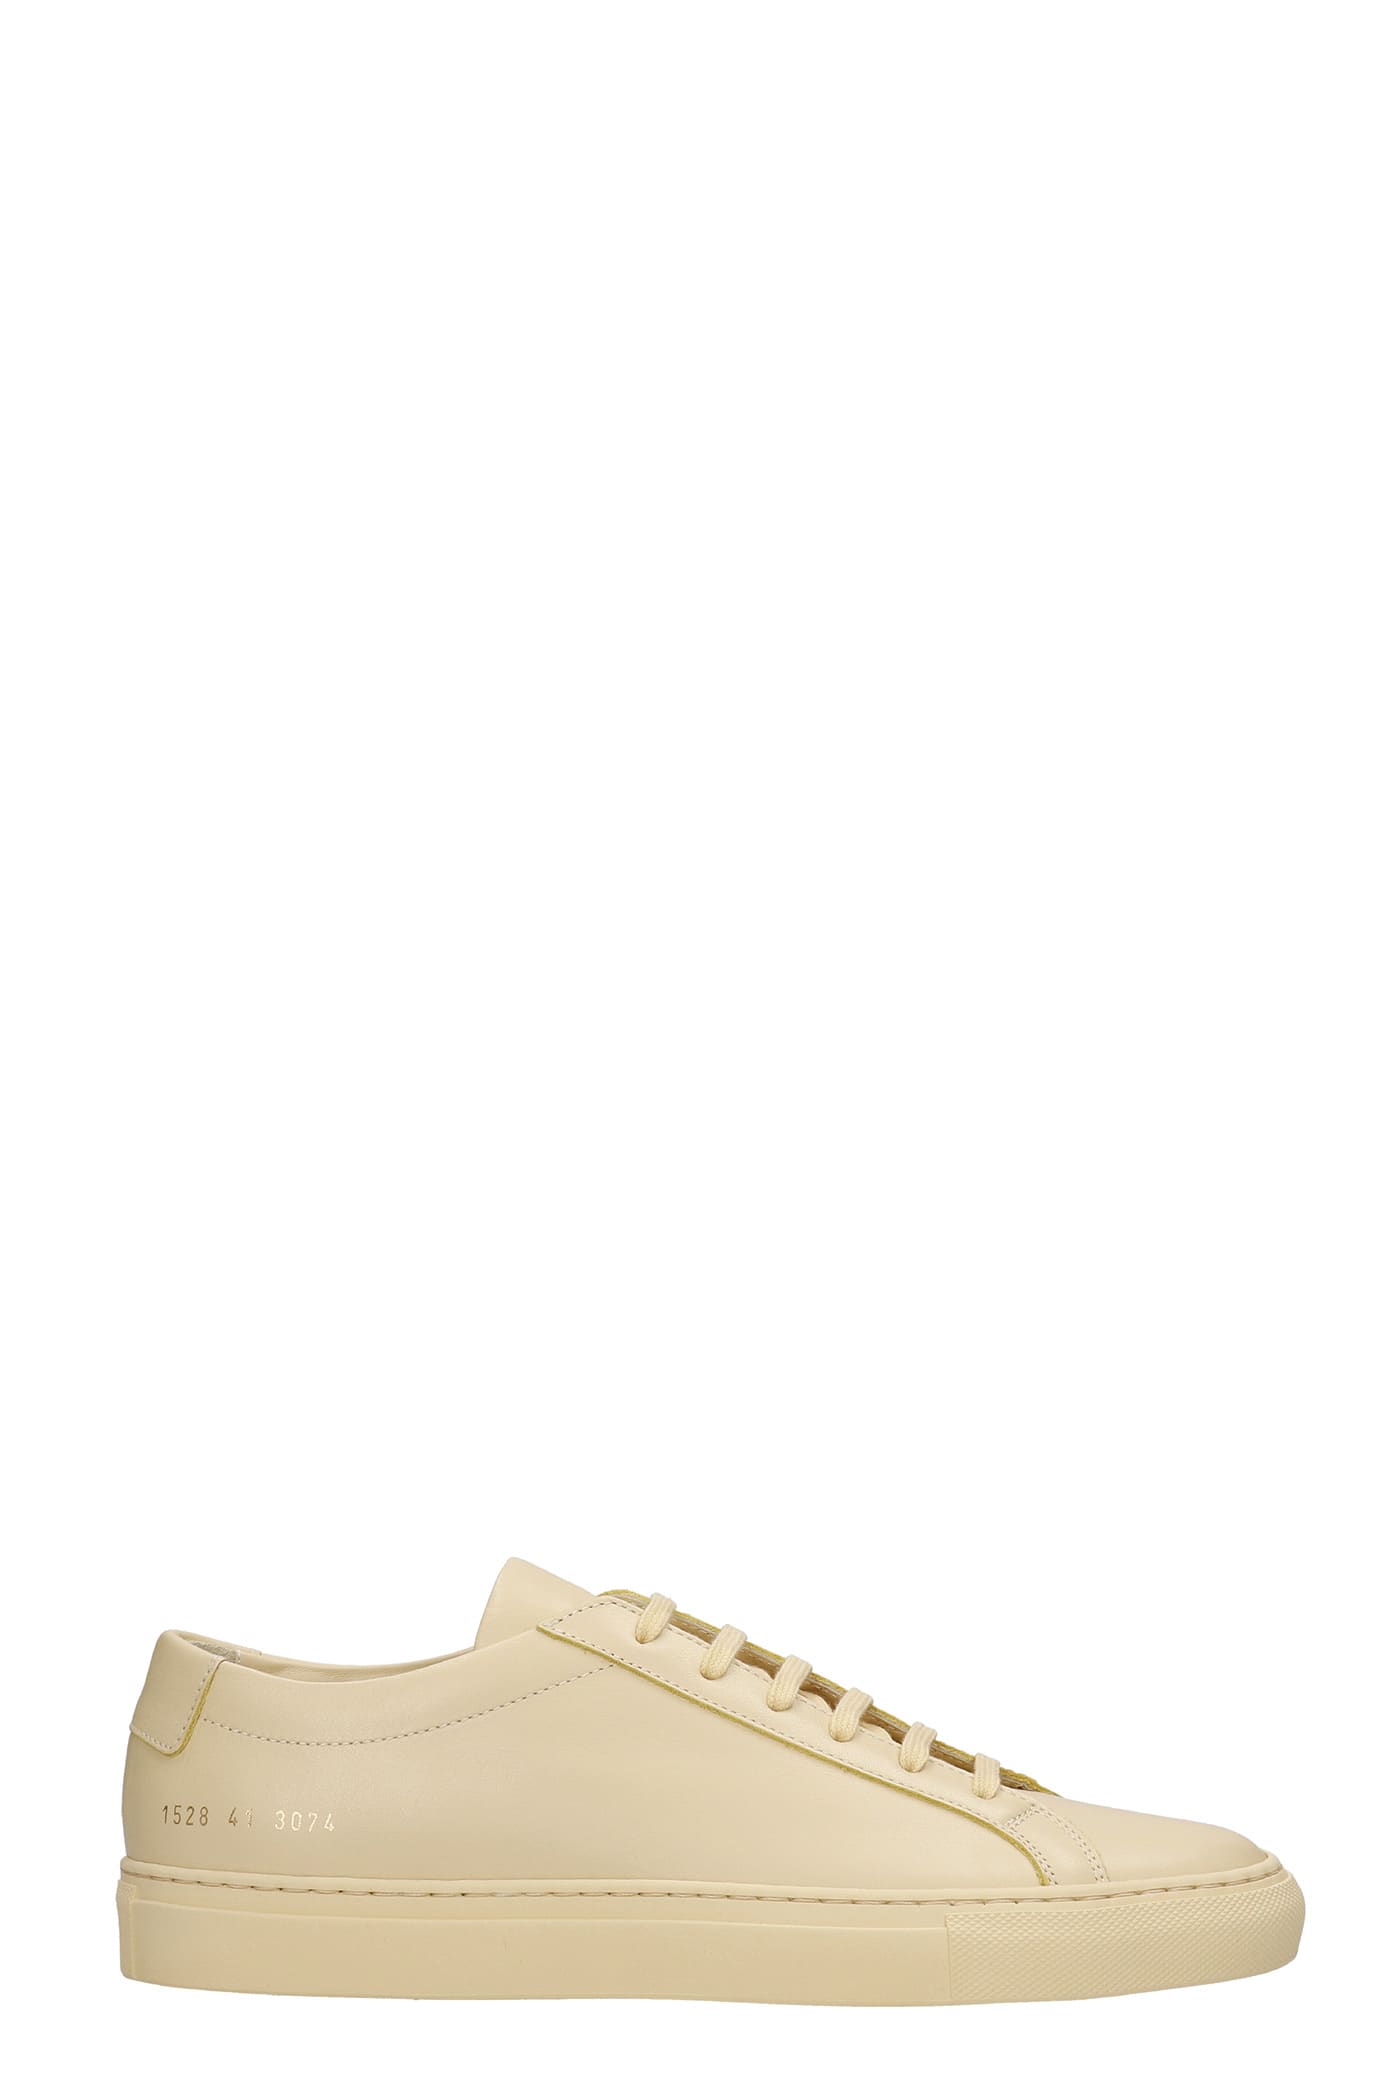 Common Projects Achille Sneakers In Yellow Leather